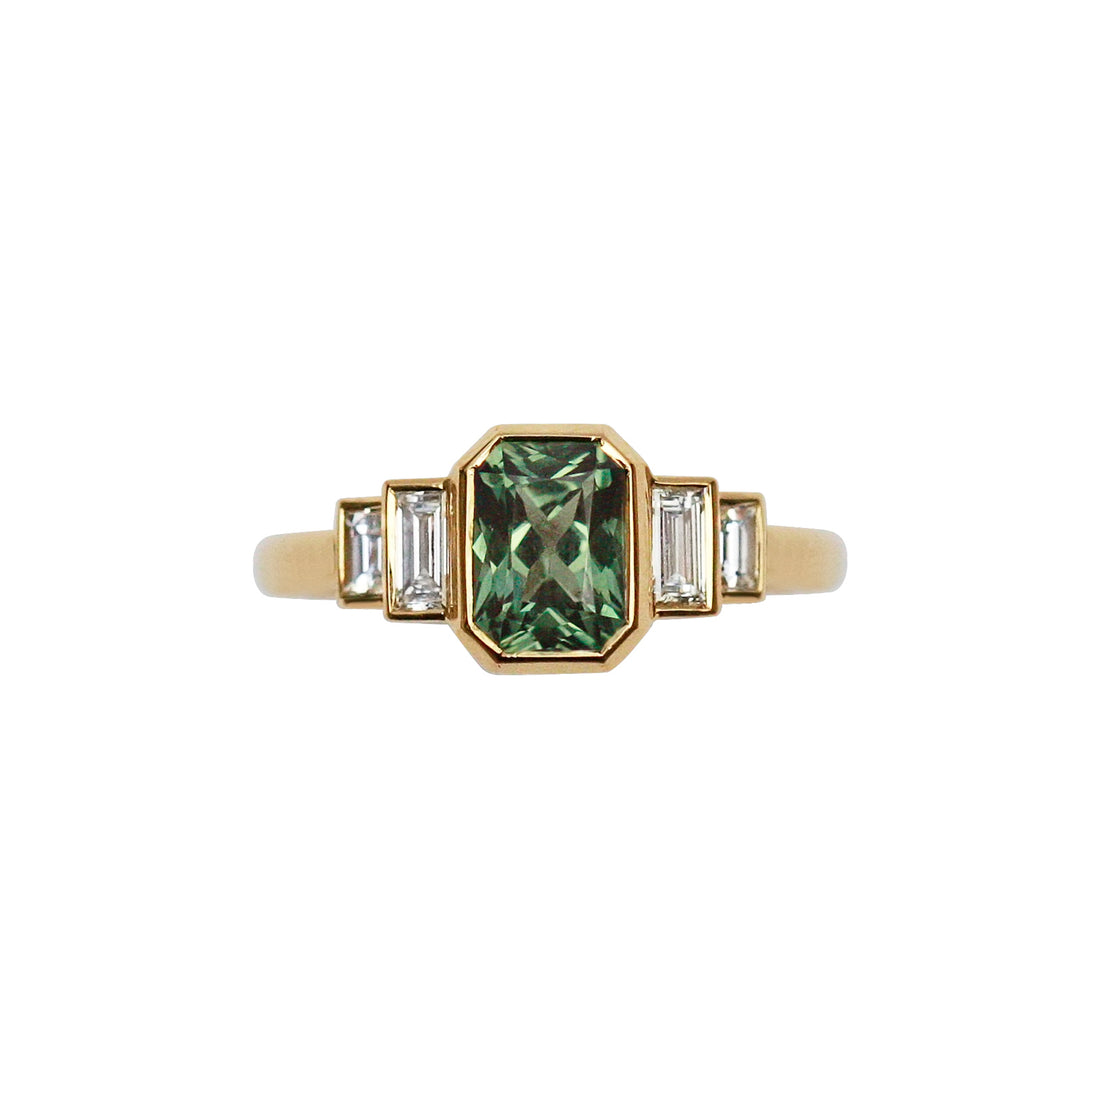  Olive Green Sapphire Deco Style Ring with Baguette Cut White Diamonds by Gee Woods | The Cut London